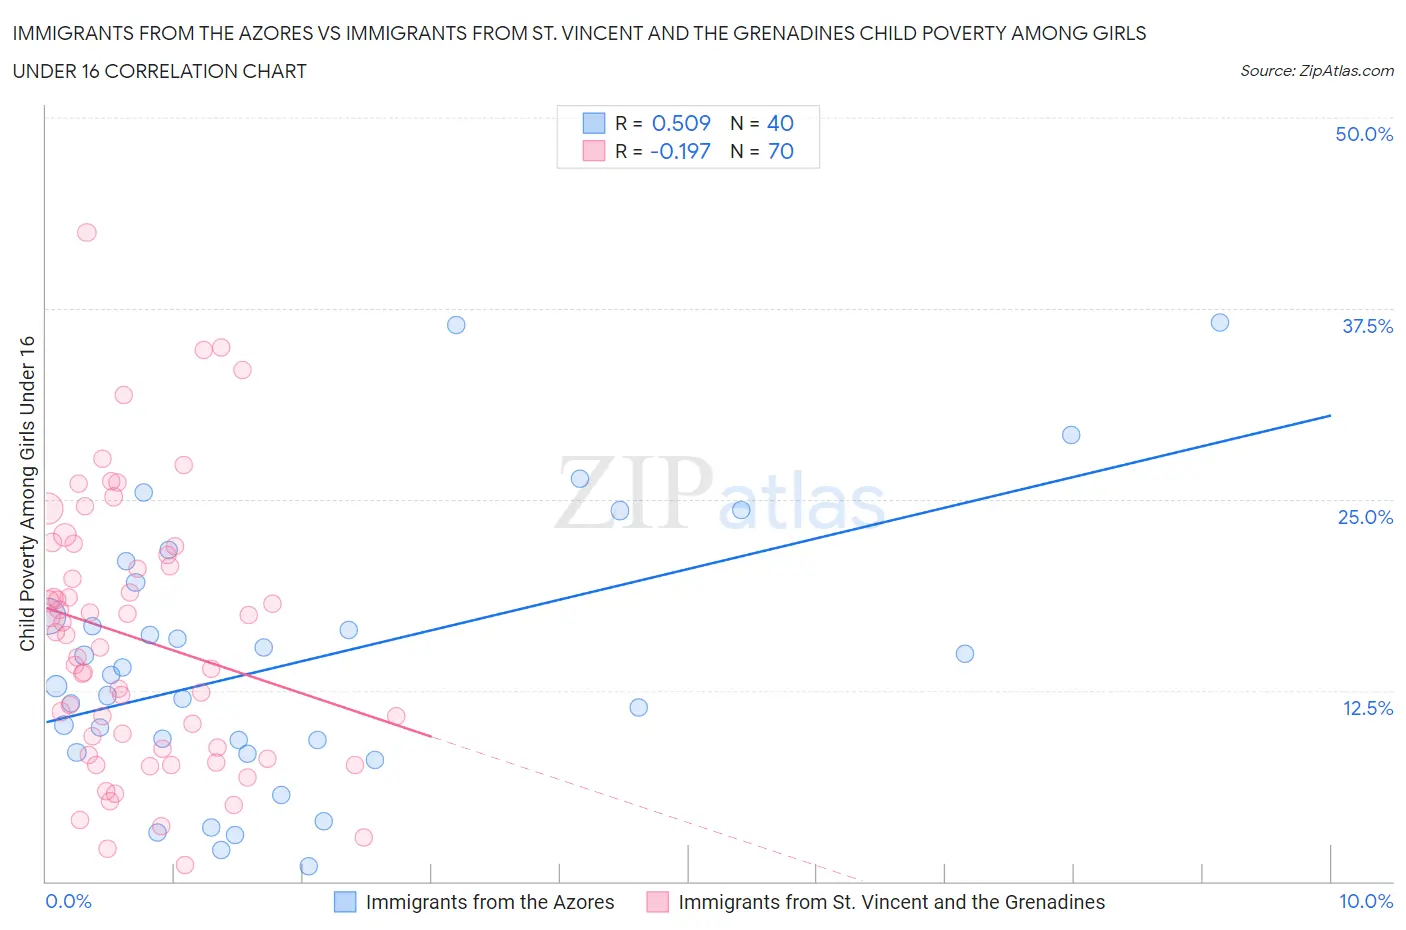 Immigrants from the Azores vs Immigrants from St. Vincent and the Grenadines Child Poverty Among Girls Under 16